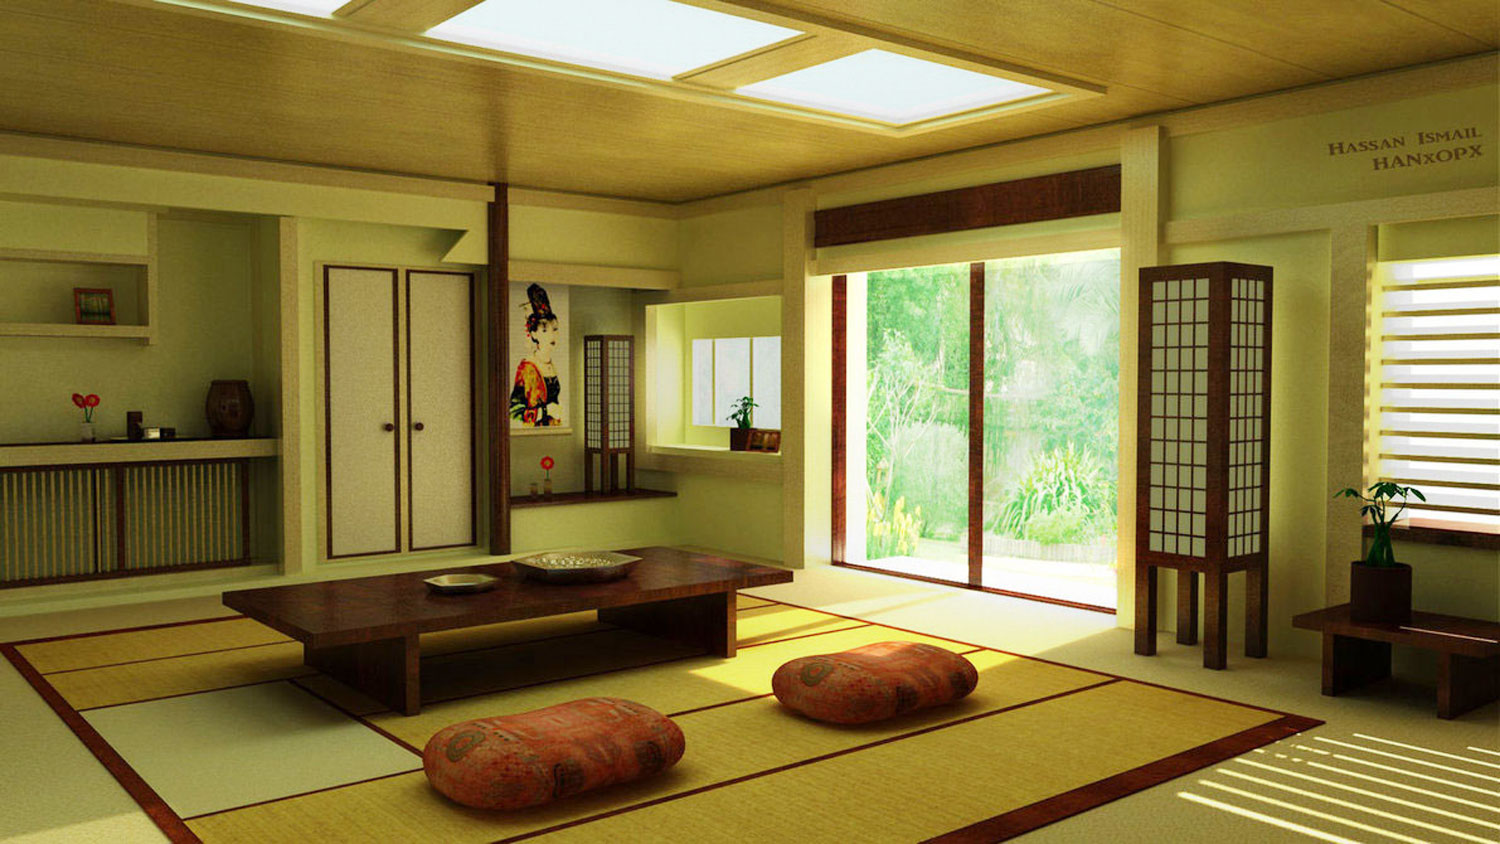 Japanese Home For Classic Japanese Home Interior Design For Living Room With Traditional Wheat Thick Carpet Ideas And Rustic Dark Brown Expanding Table Also Relaxing Wood Wall Decor Ideas Plus Cute Flower Vase Furniture Selecting Beautiful Furniture For Home Interior Design